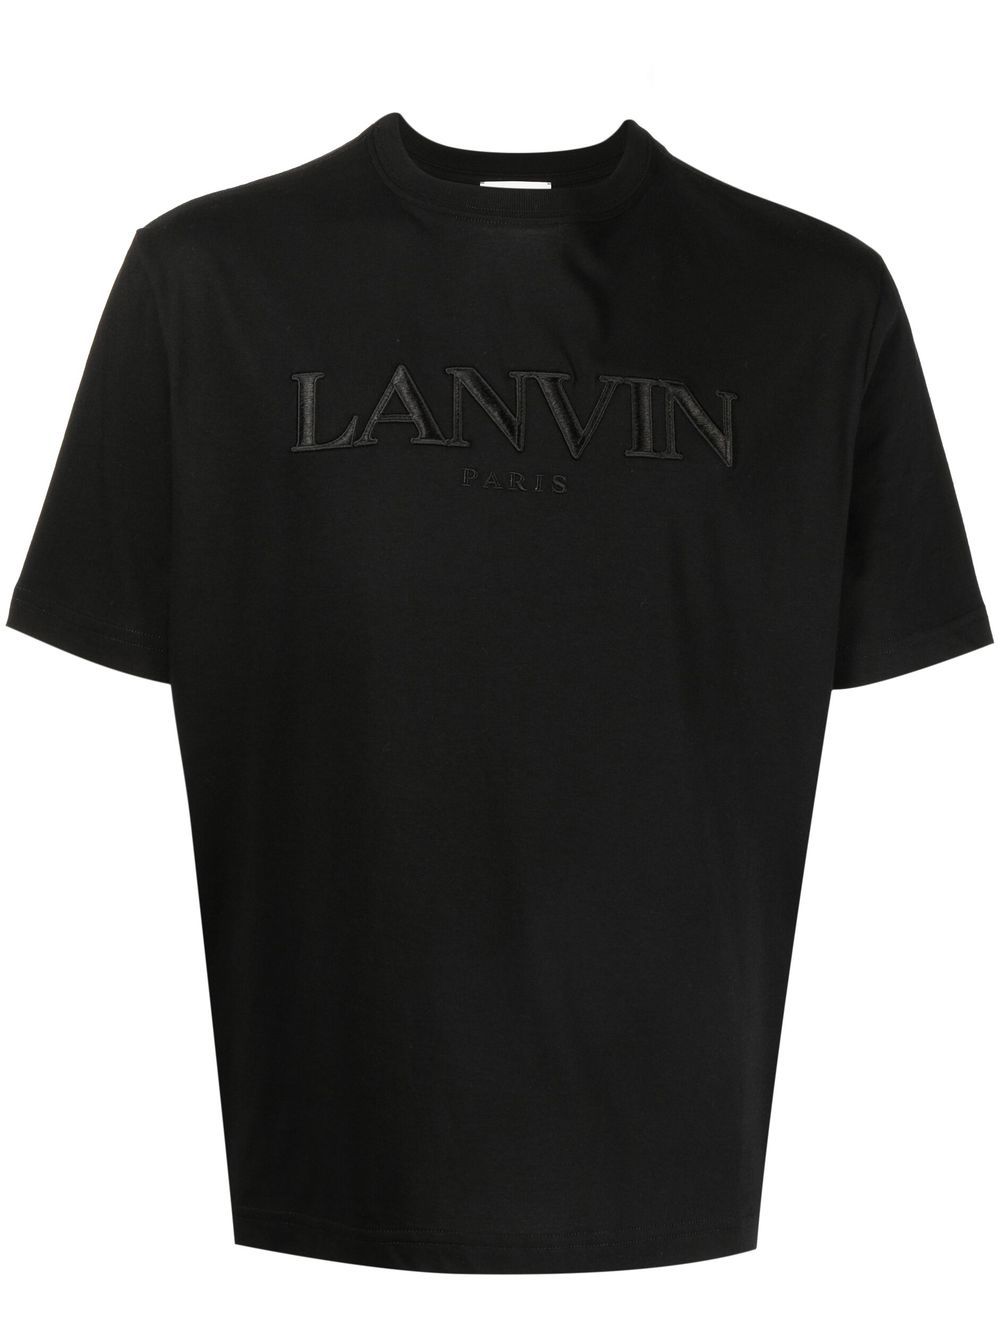 LANVIN EMBROIDERED LOGO T-SHIRT